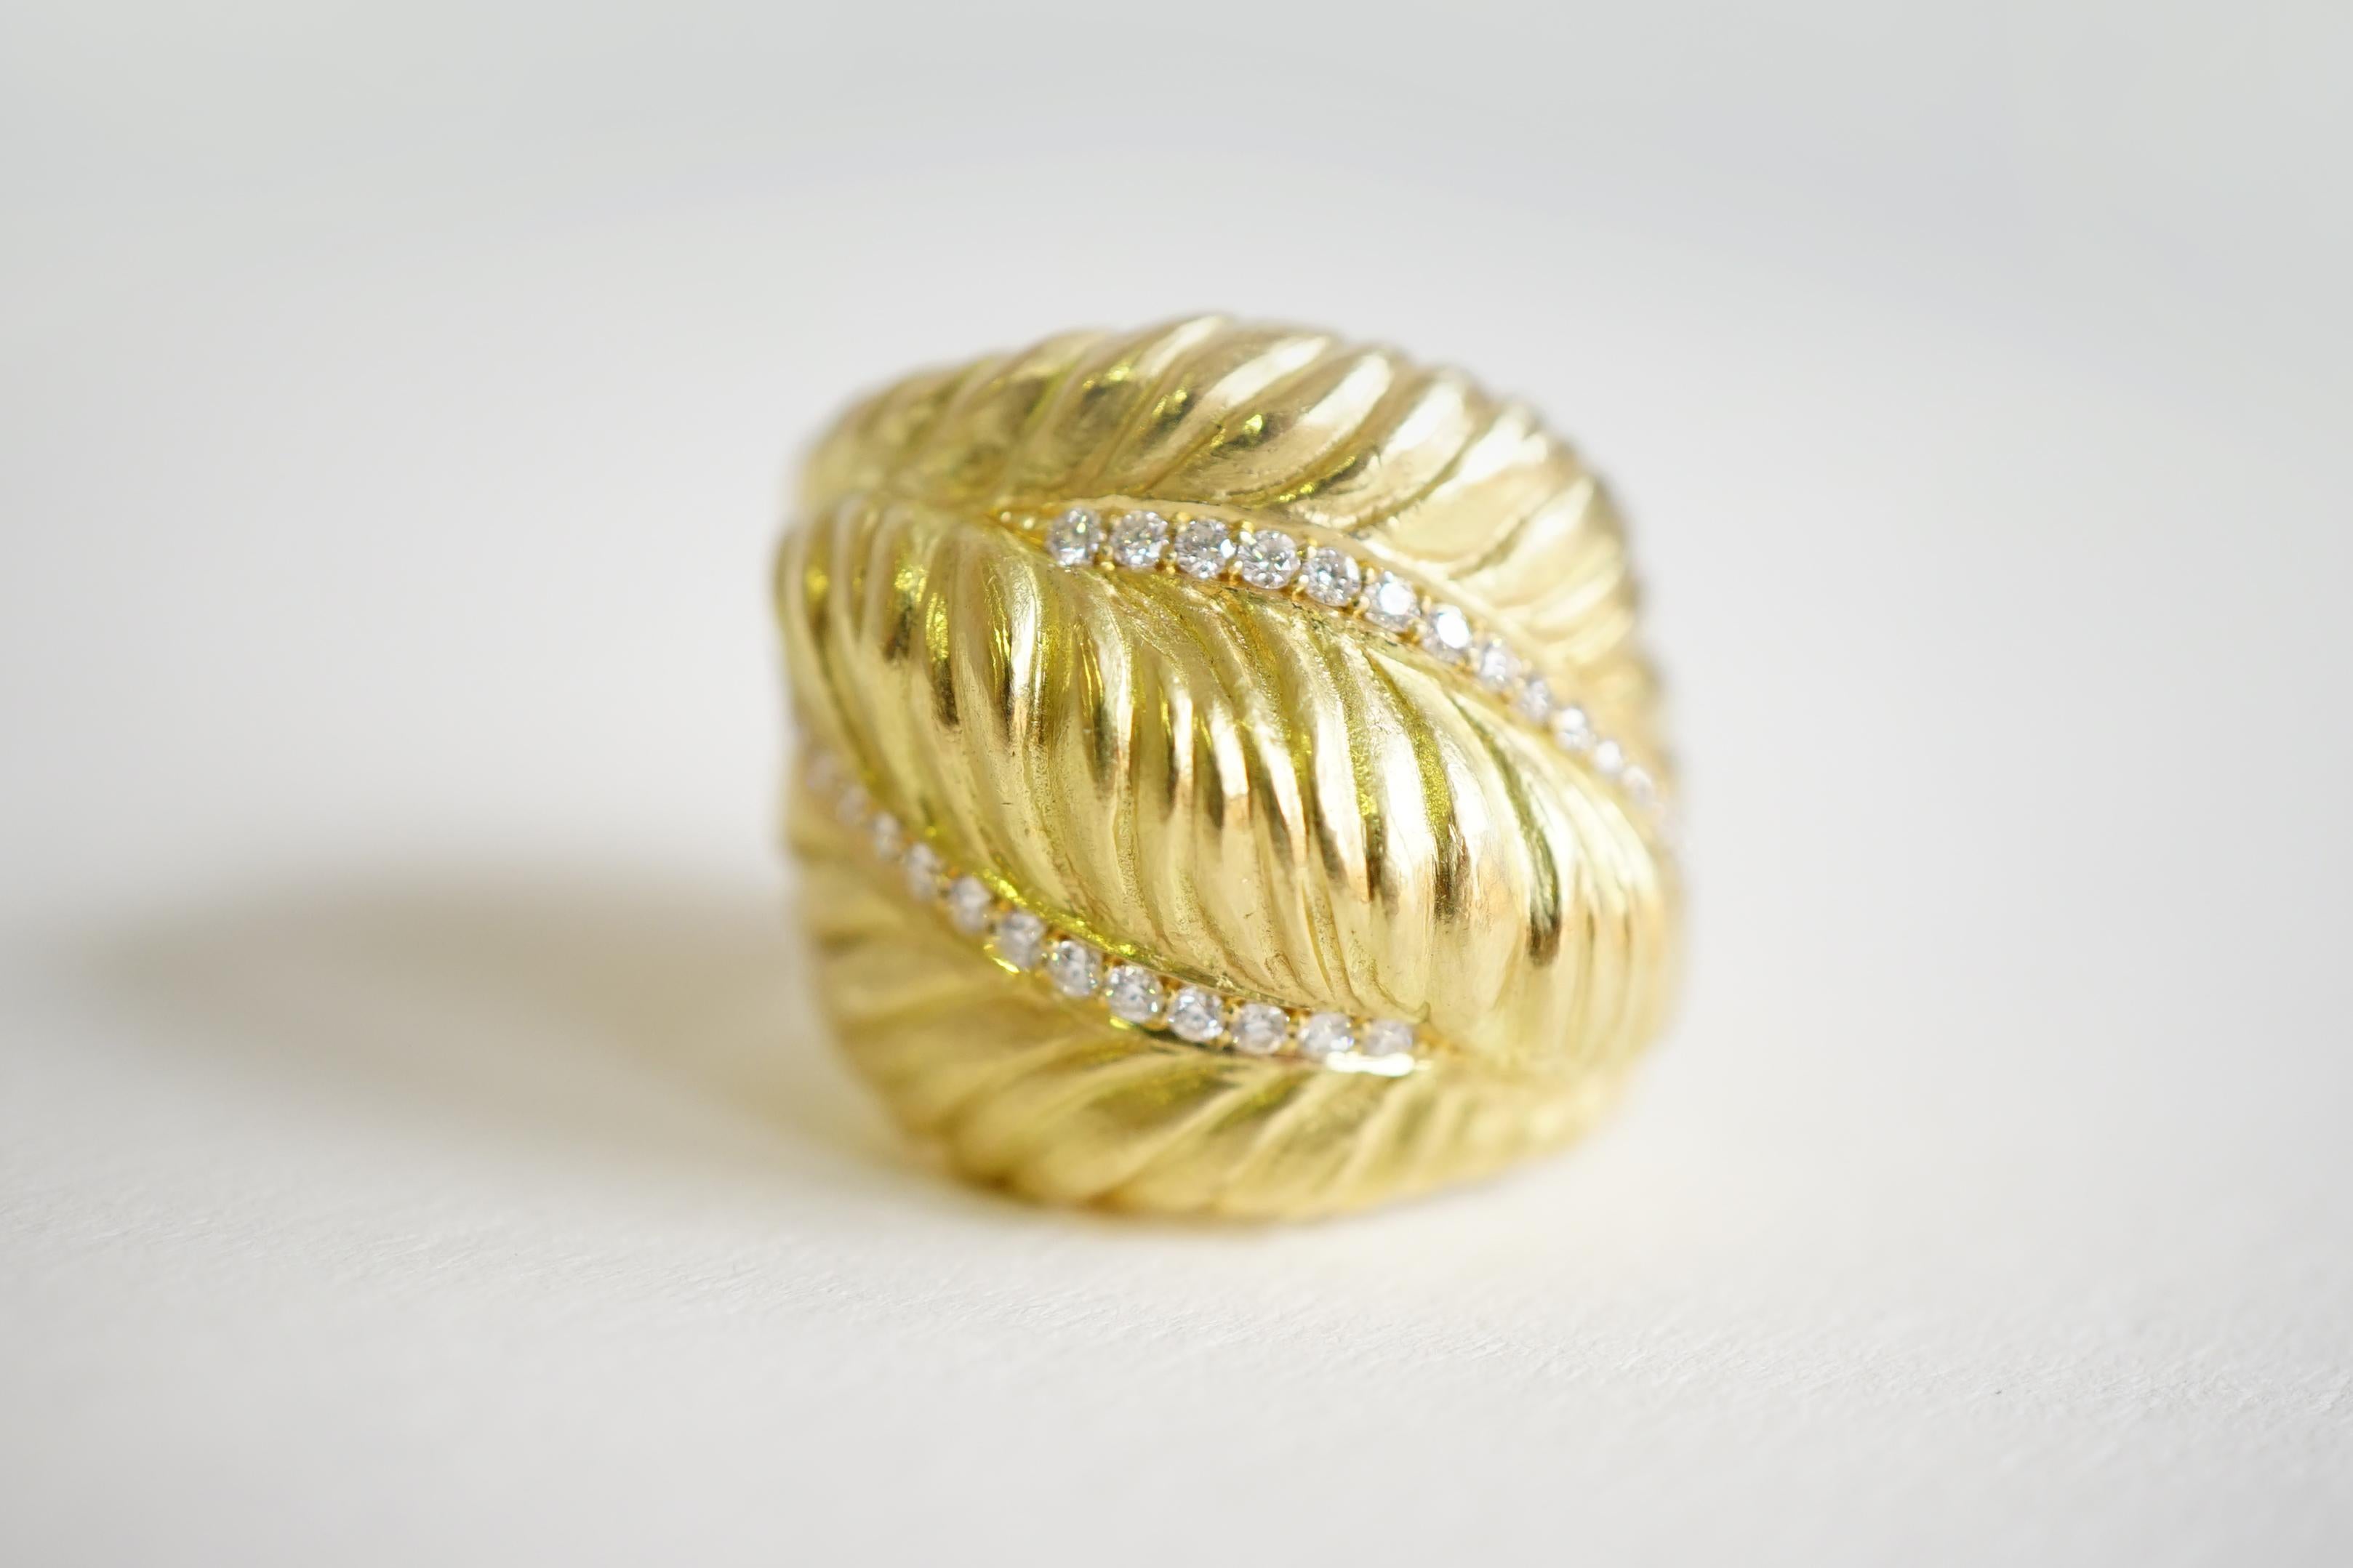 Coralie Van Caloen 18k Gold Crossover Feathers with Diamonds Band Ring is entirely hand made and forged in Antwerp (Belgium) by experts goldsmiths therefore it is a very unique piece. The ring has gradient sized old European cut diamonds all across